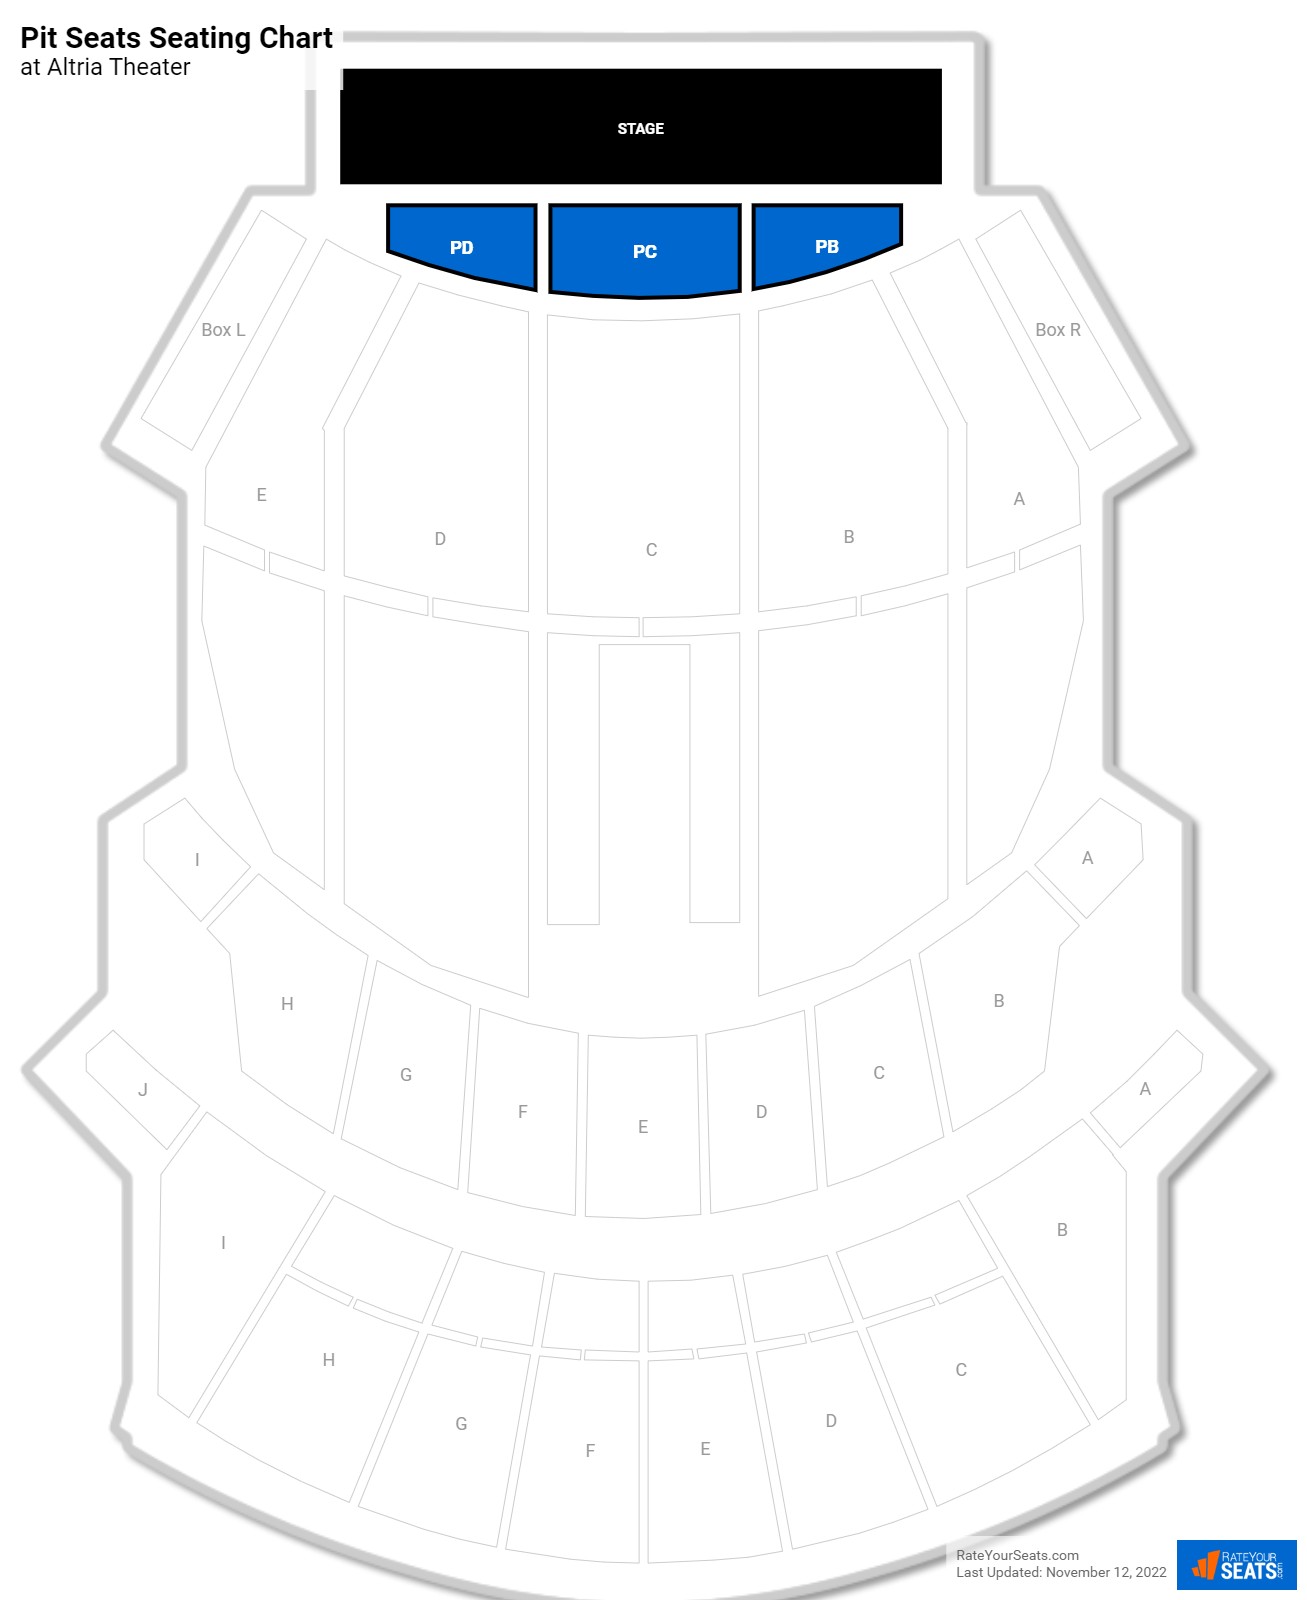 Altria Theater Pit Seats Rateyourseats Com